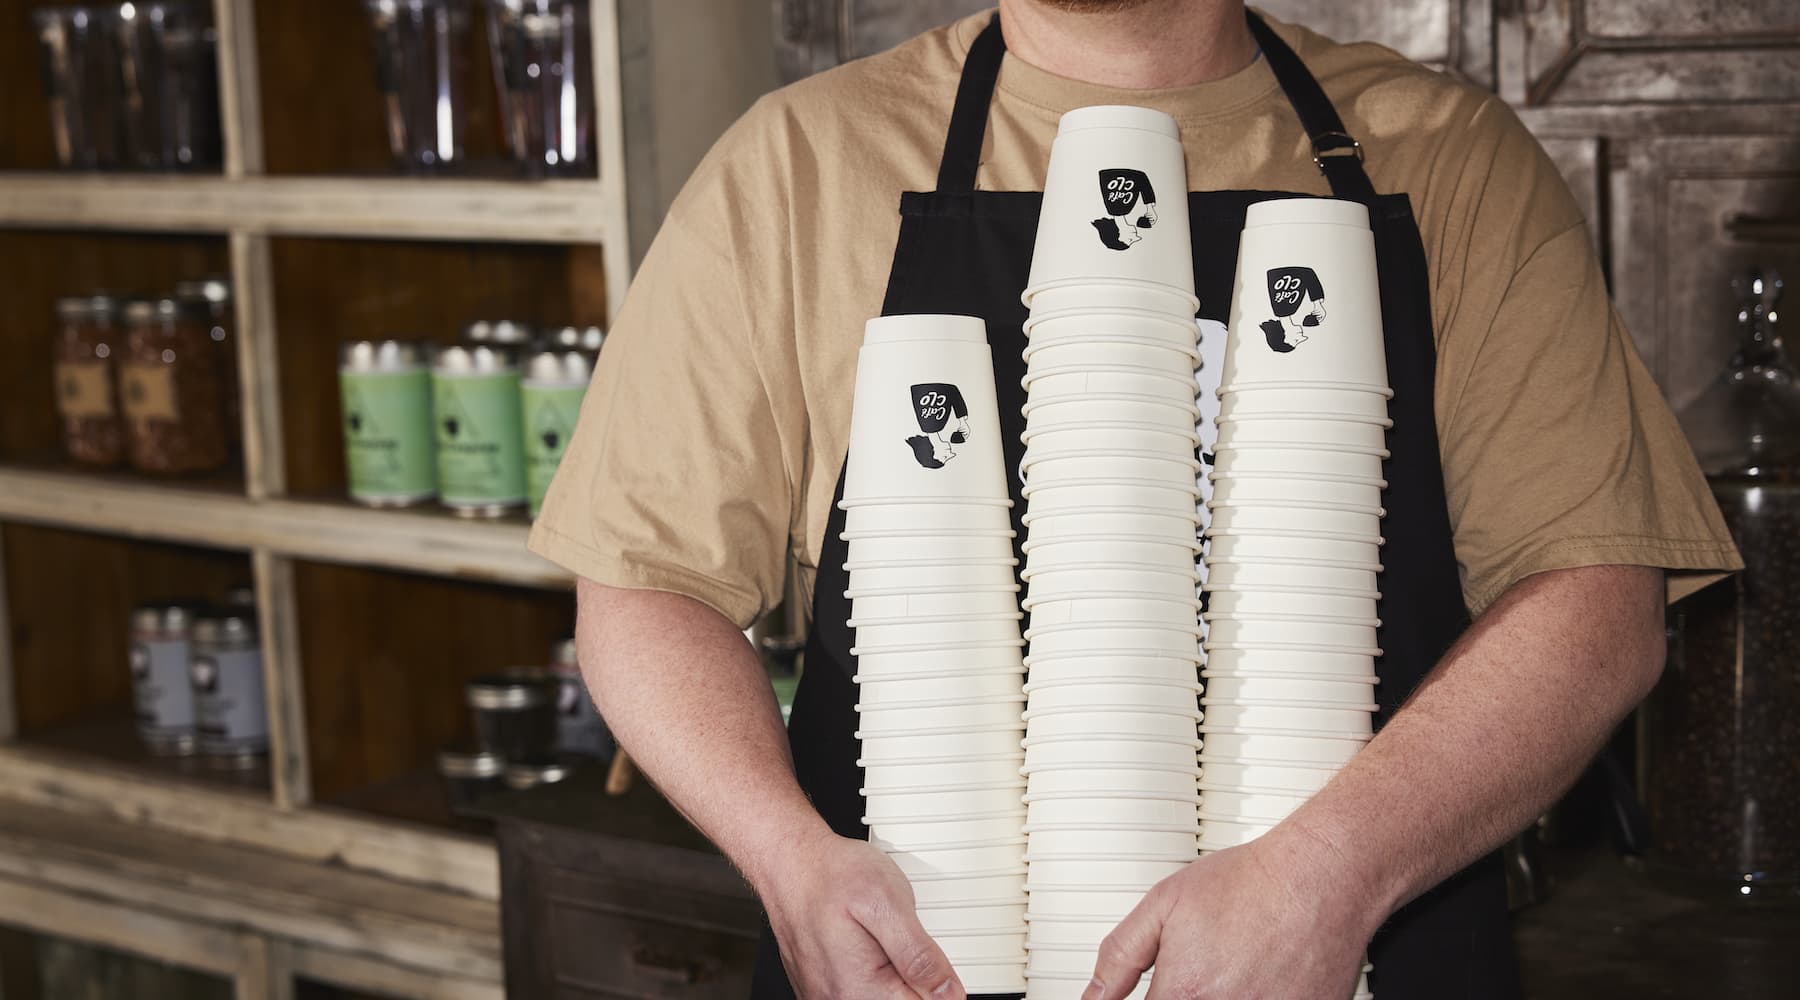 A cafe worker holding branded coffee cups